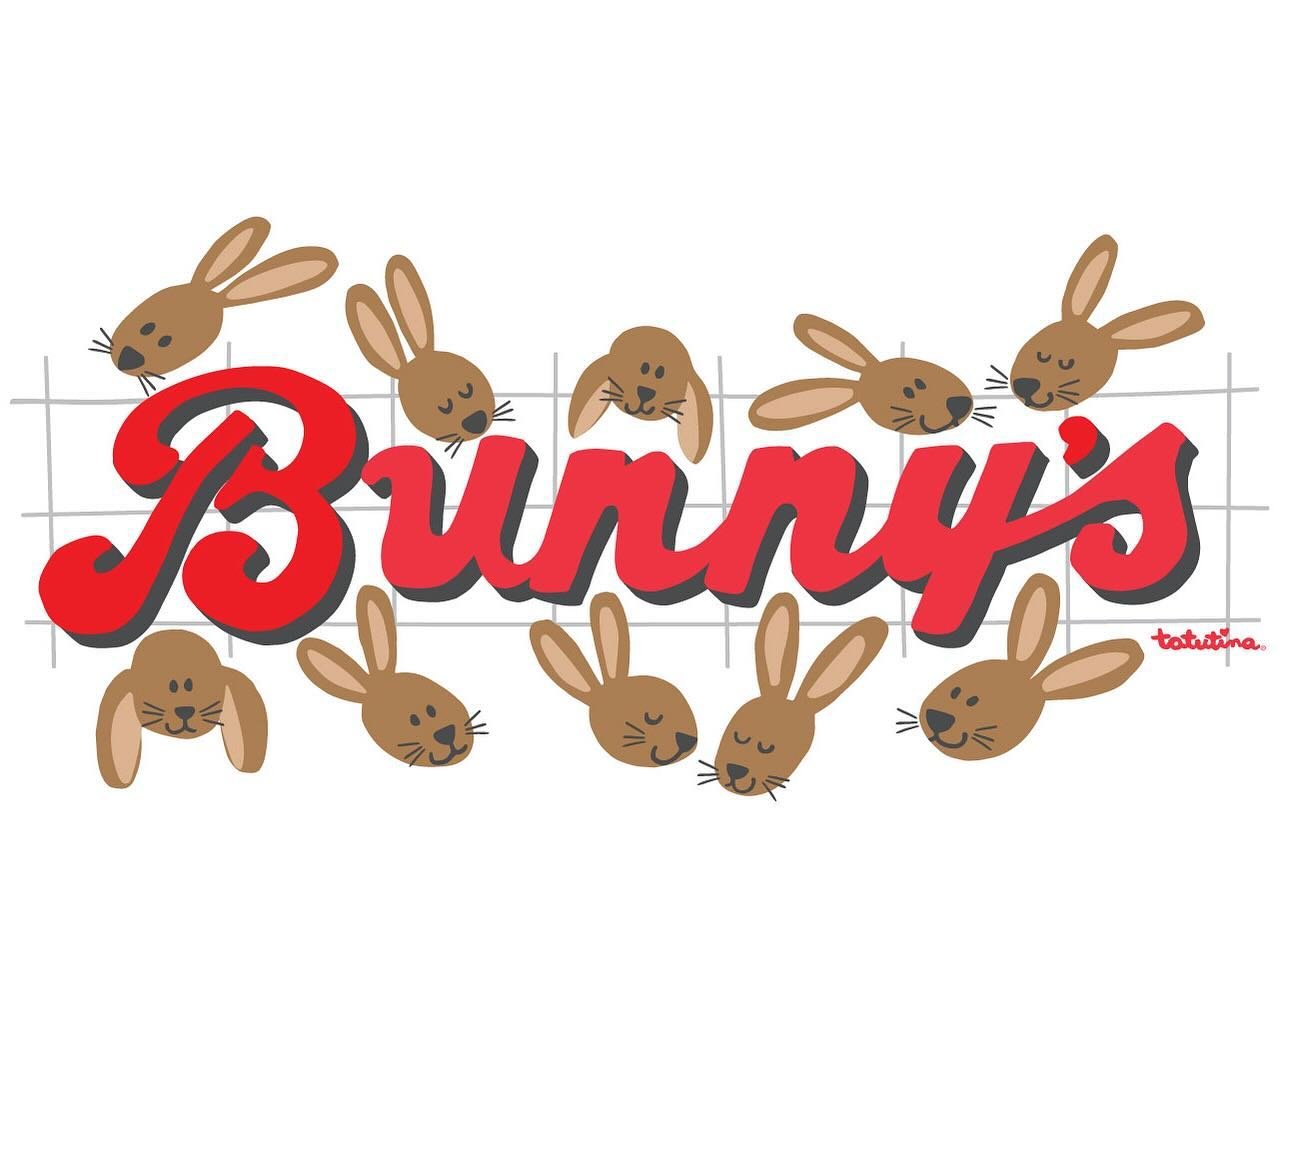 Benny&rsquo;s is my favorite store 🎵 , I mean Bunny&rsquo;s 🐇 
biggest little state in the union - gotta love Rhode Island❤️
And who didn&rsquo;t love going into Bennys for batteries, paper plates, a new bike, or a vacuum cleaner. 
#rhodeisland #ri